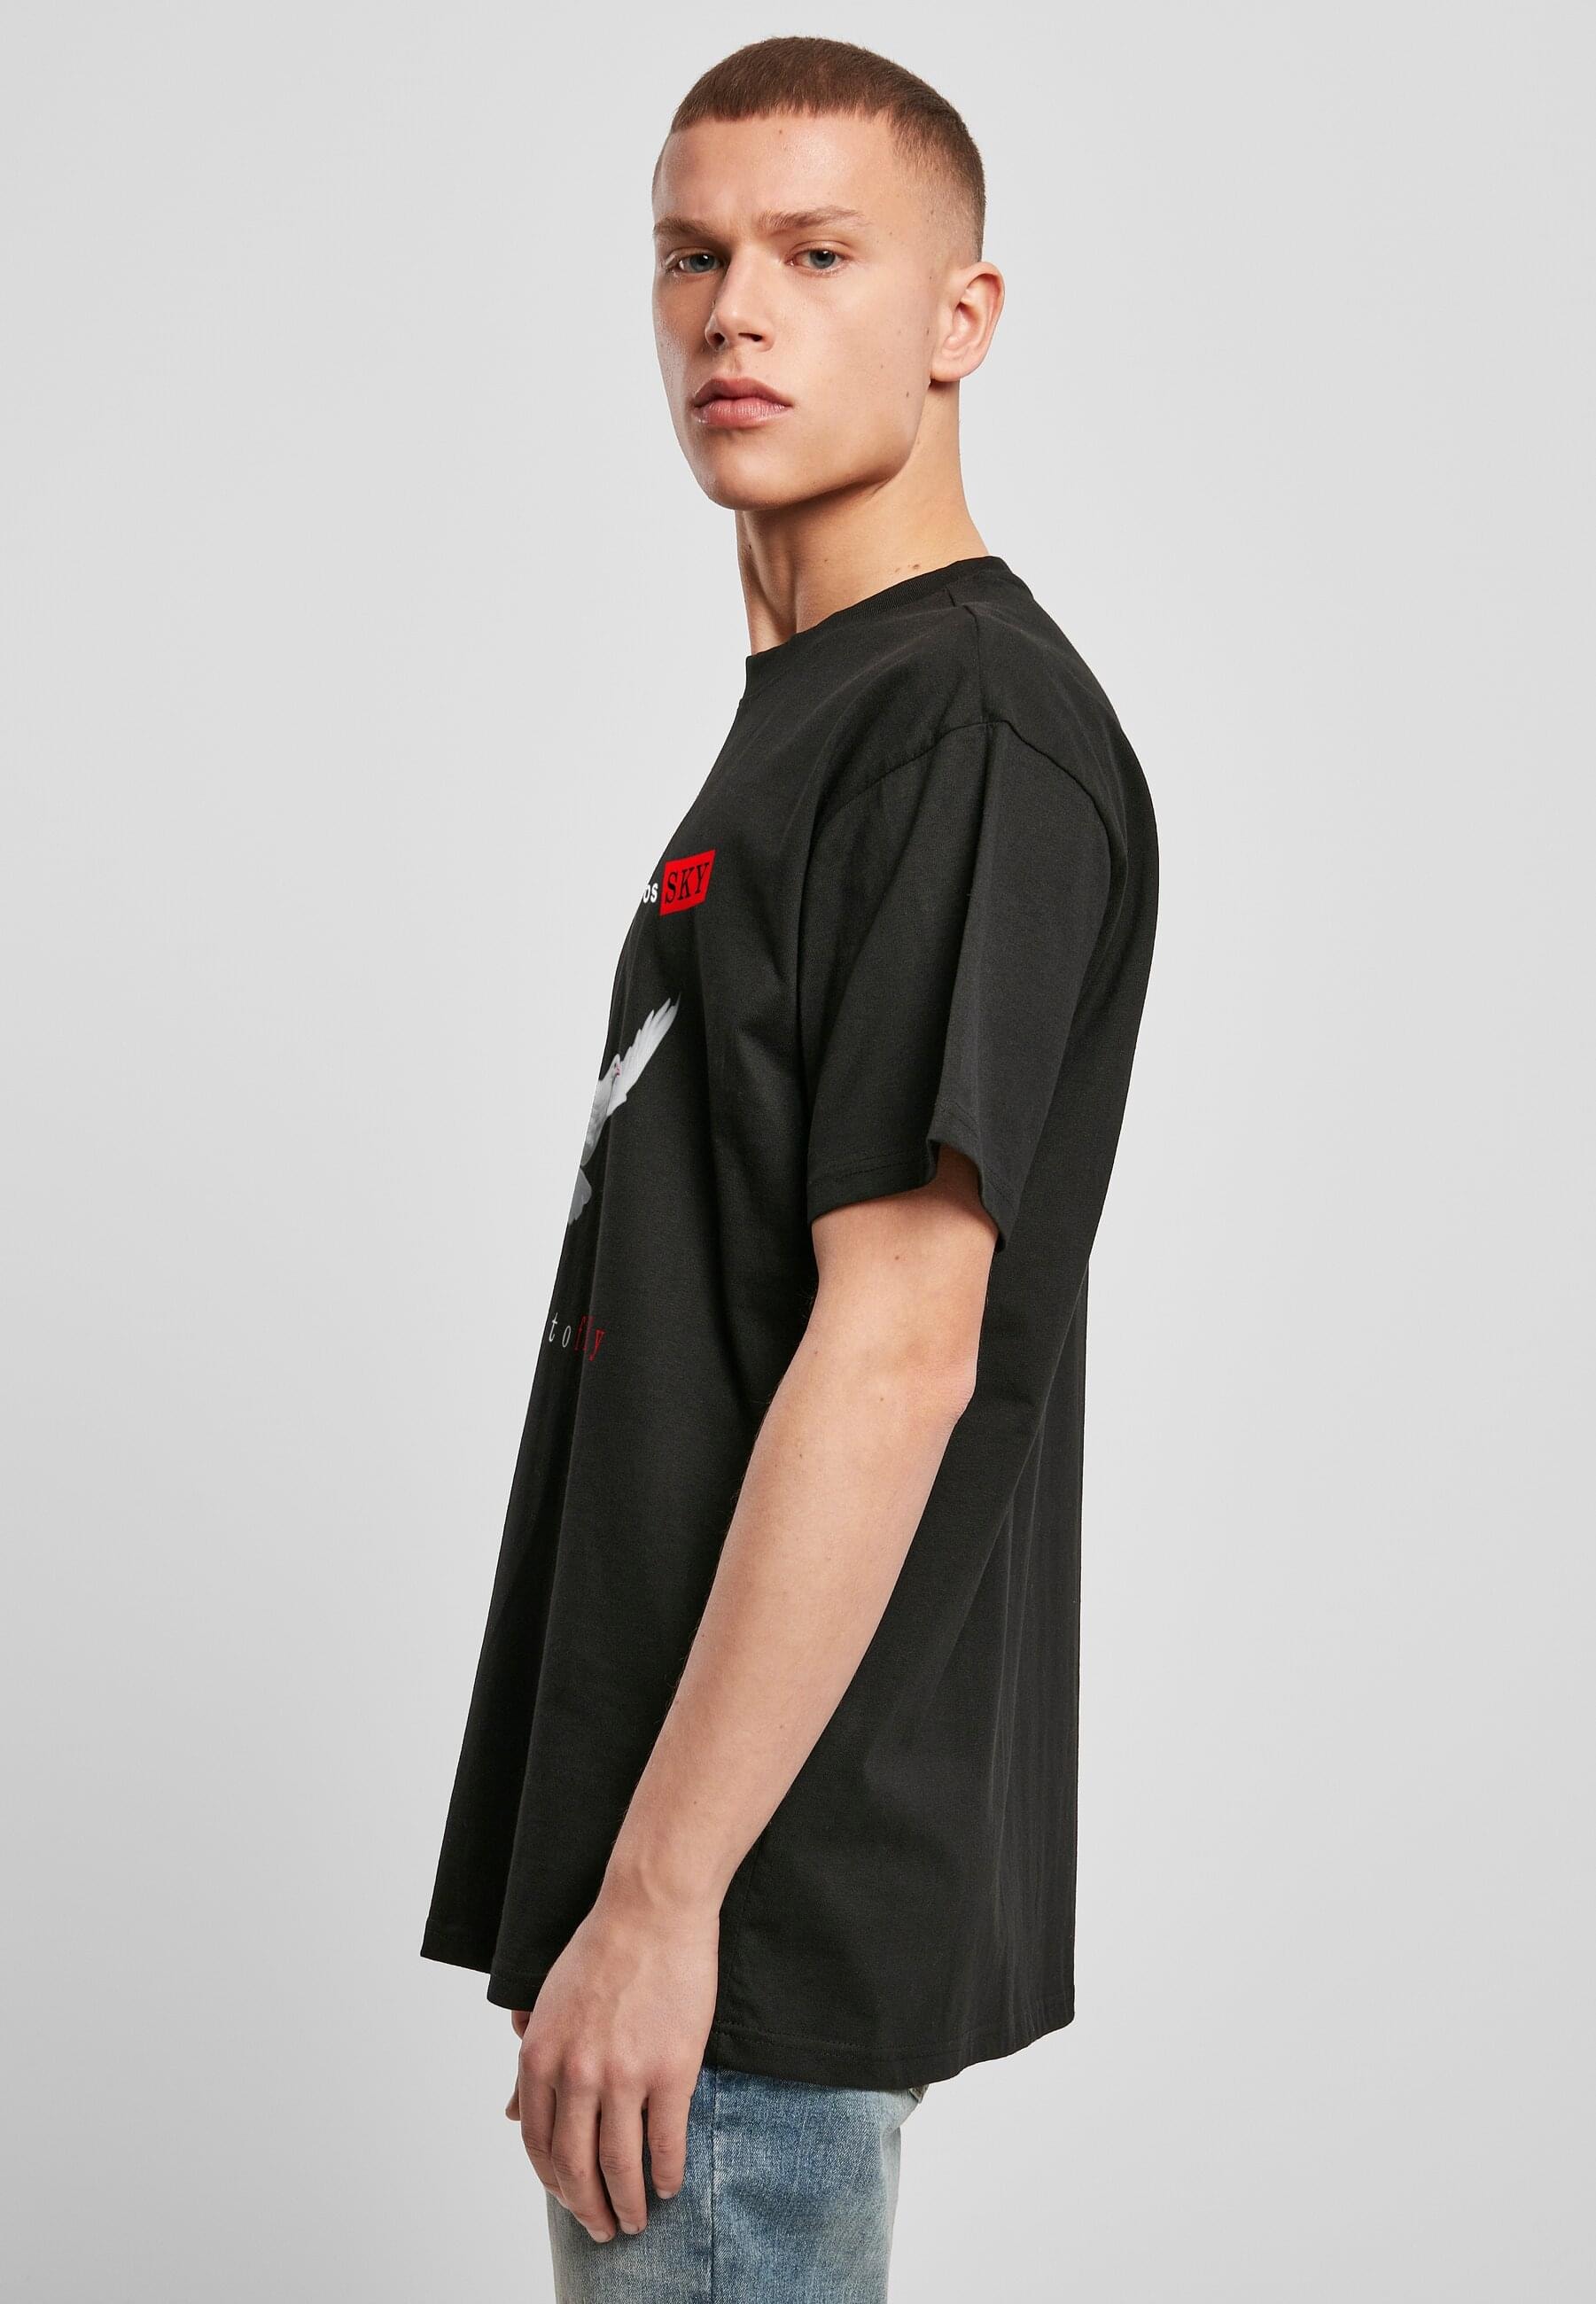 Mister (1 Tee«, Friday »Unisex tlg.) by Ready T-Shirt Tee to BAUR | Oversize Black fly Upscale